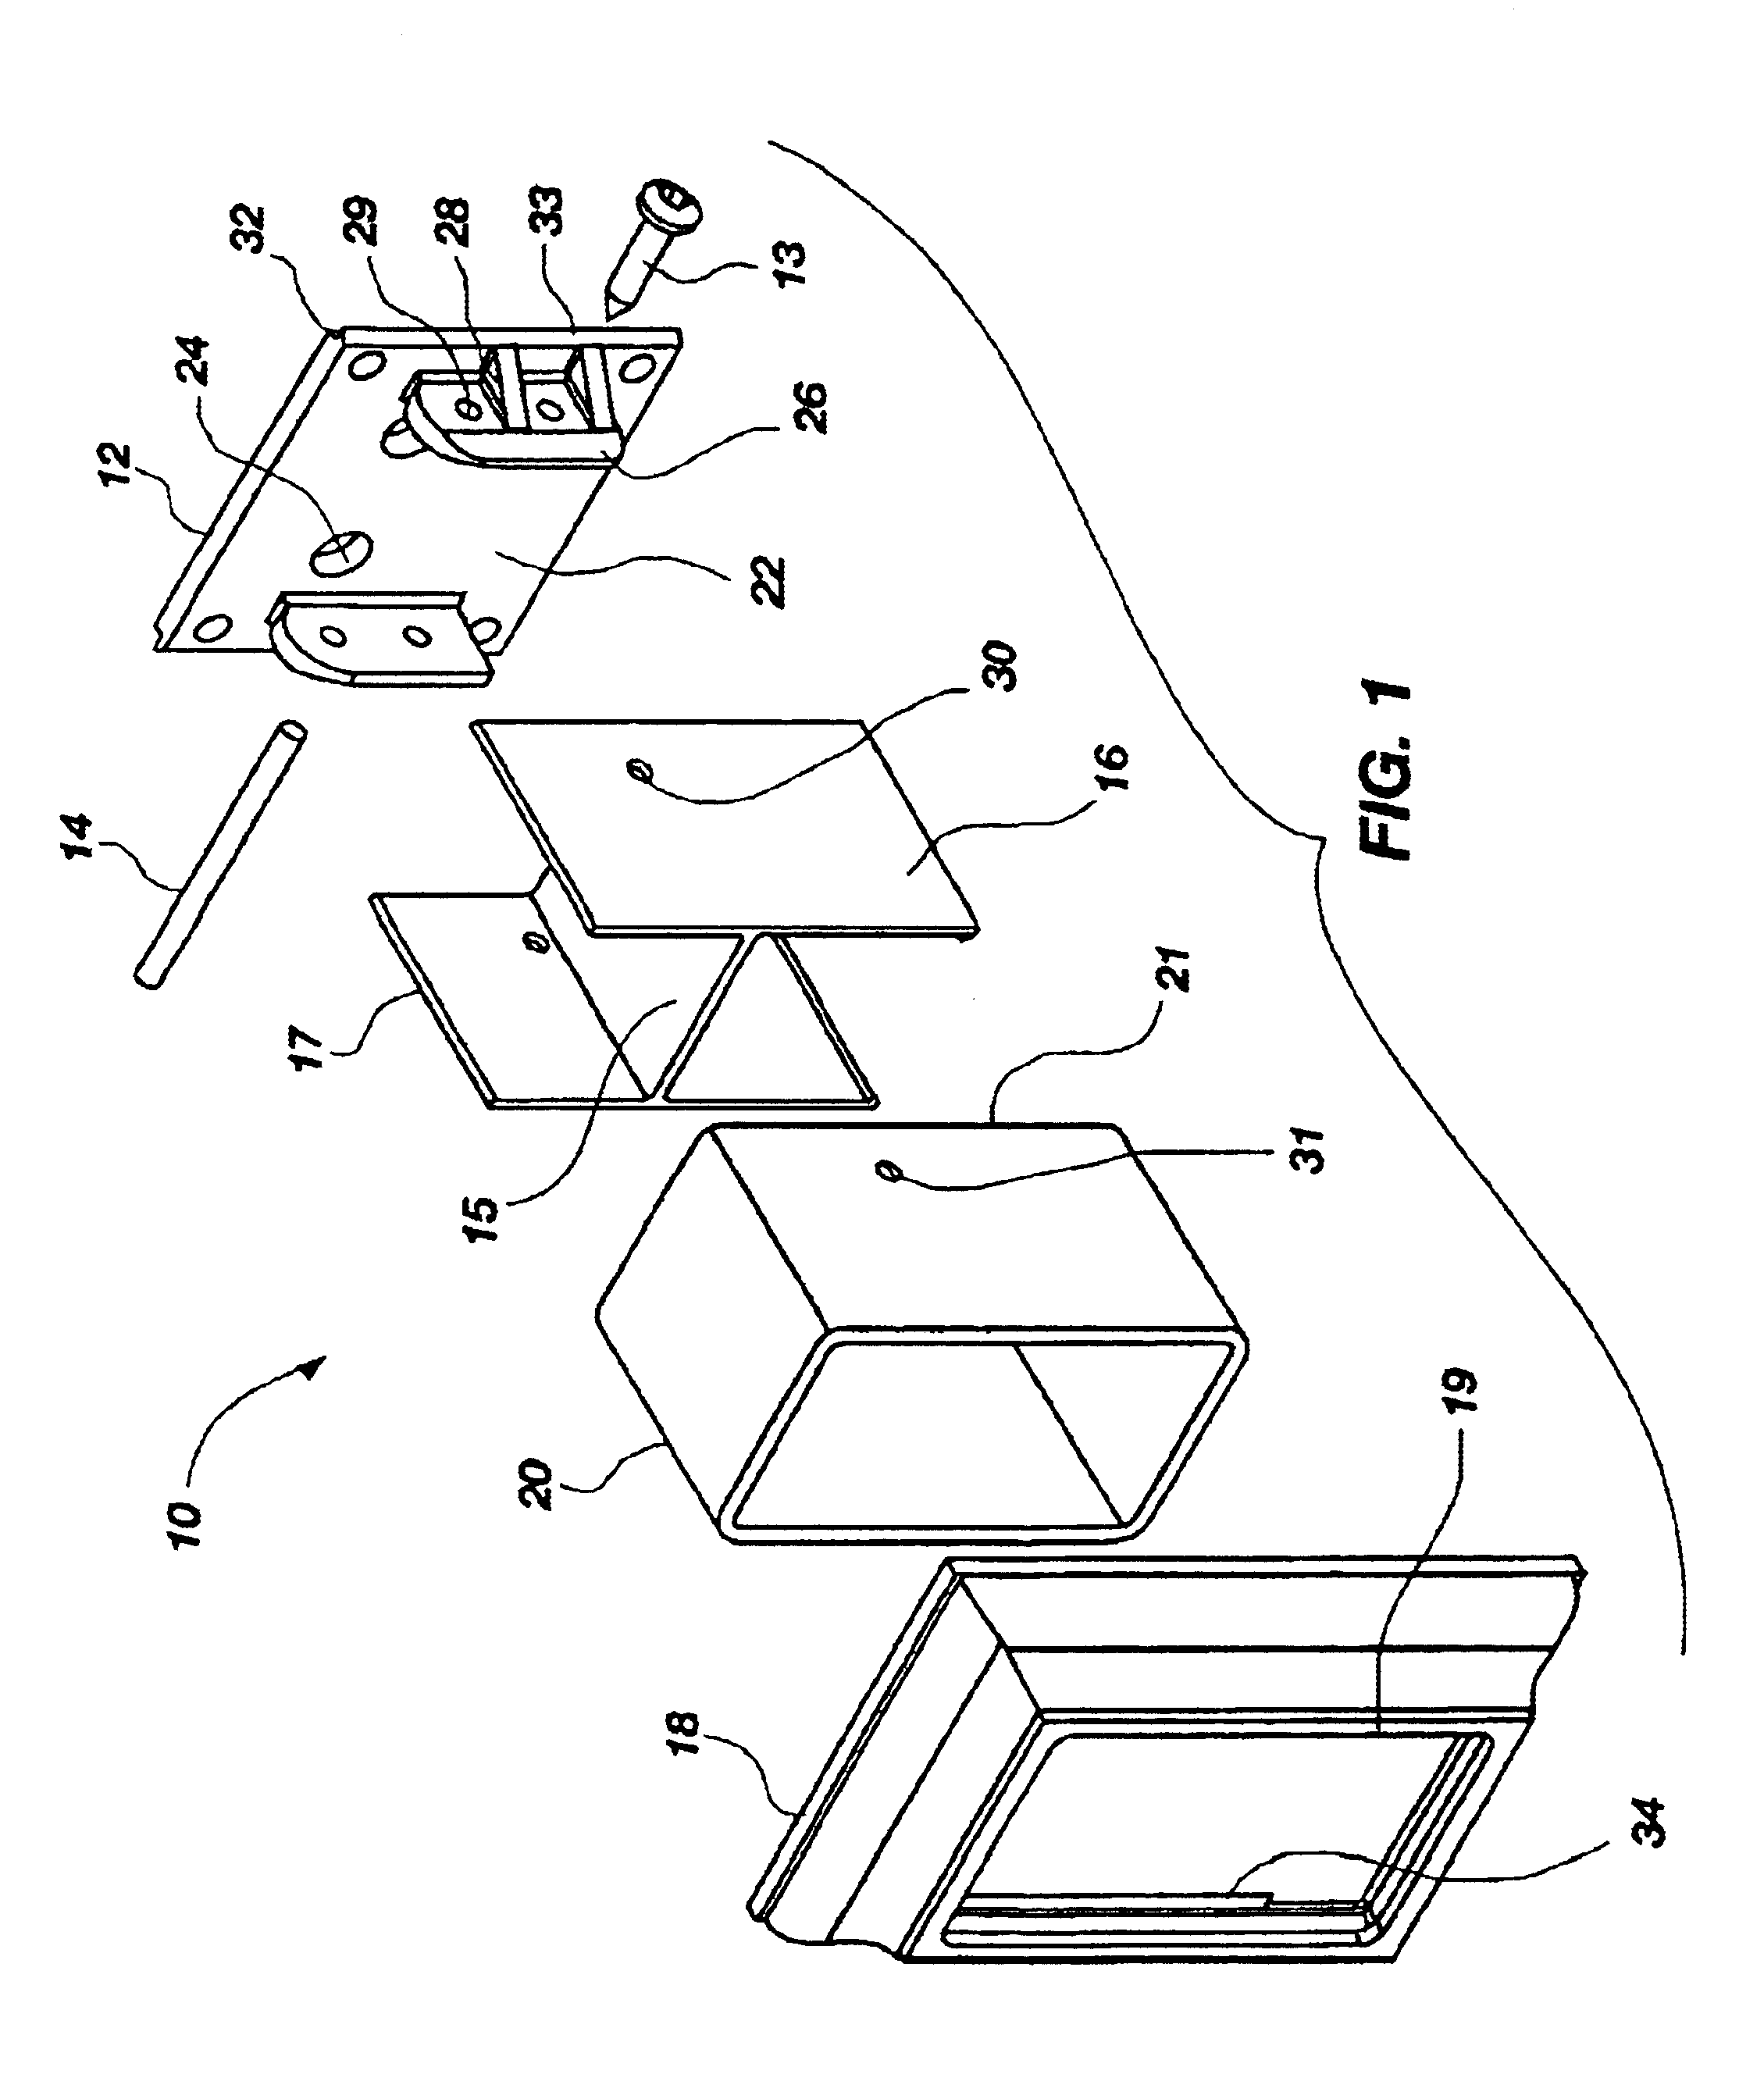 Bracket assembly for connecting rails of various configurations to a support structure